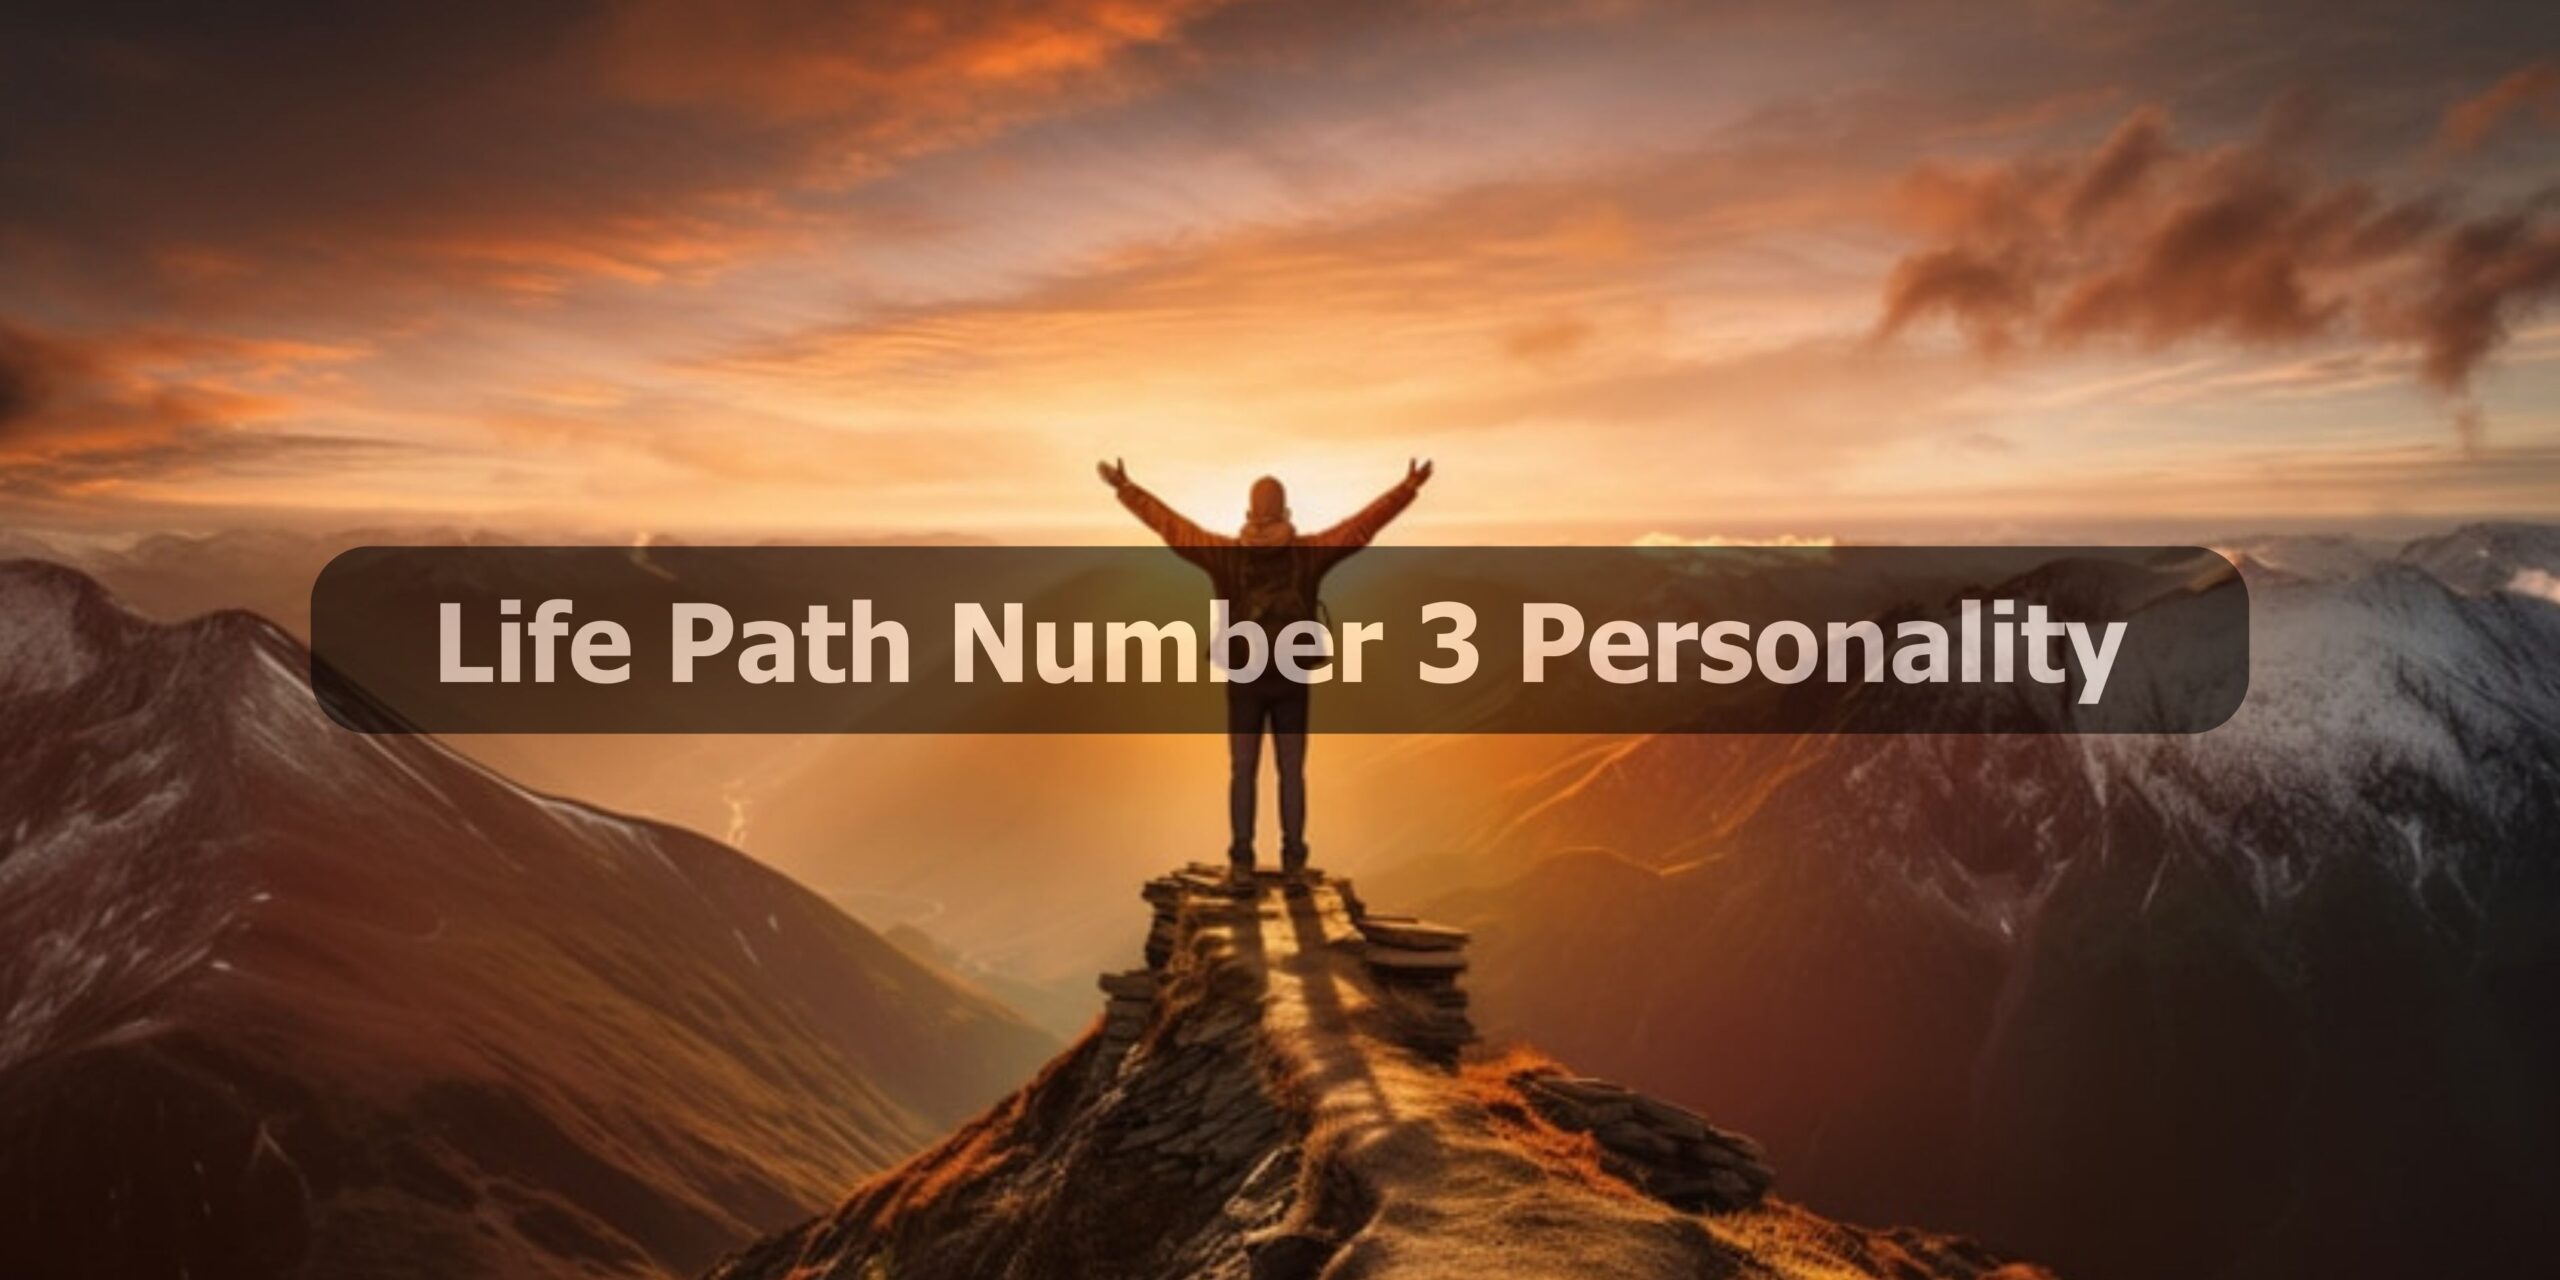 Life Path Number 3 Personality